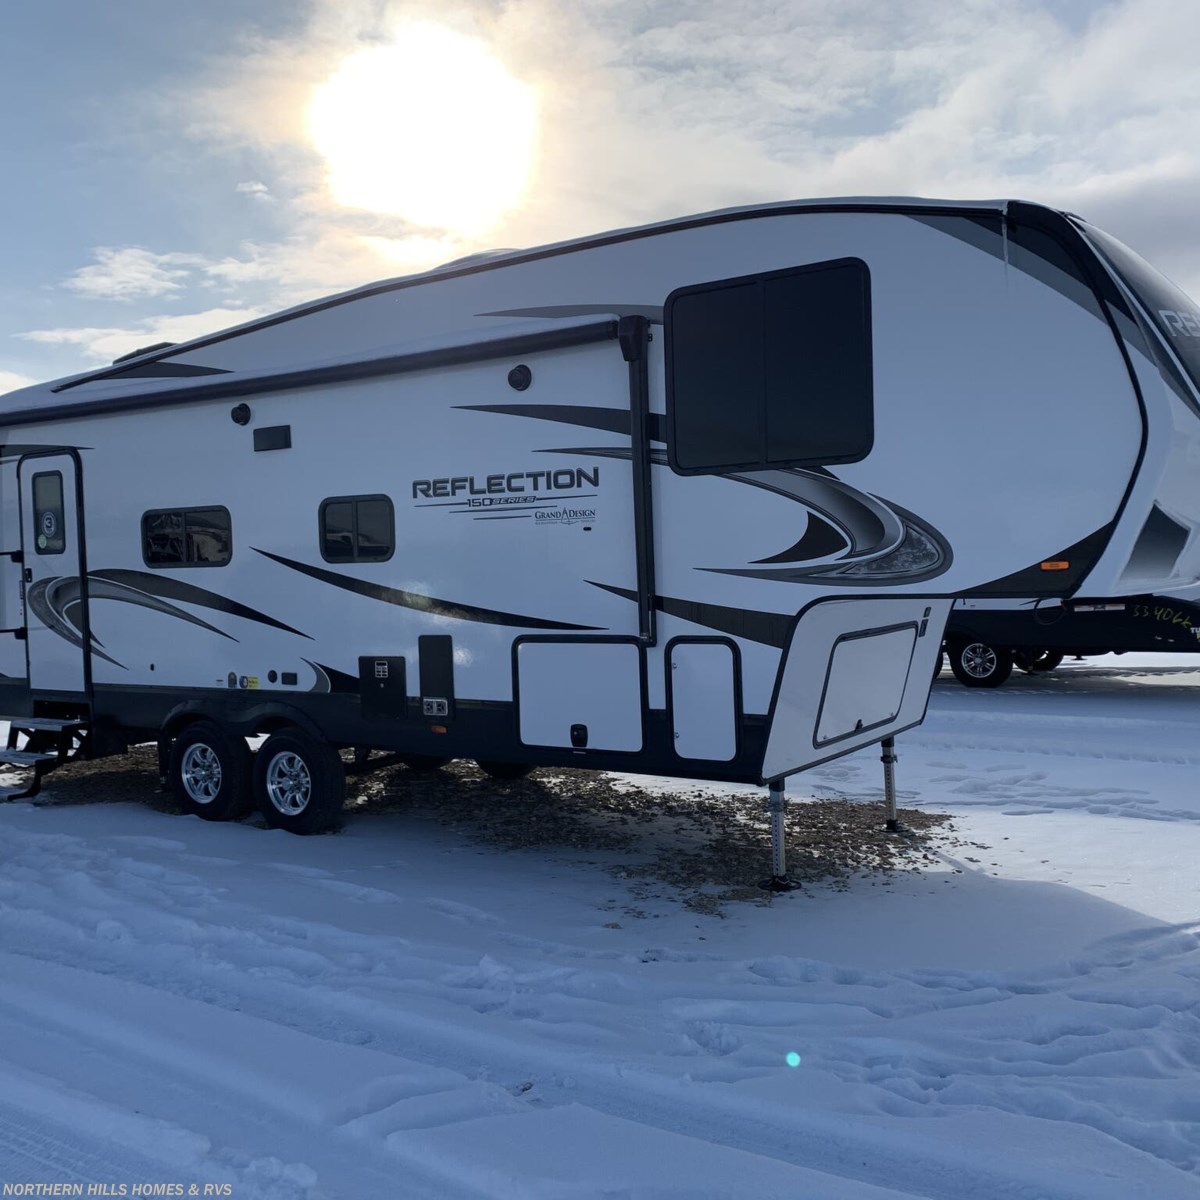 Gd21r73 21 Grand Design Reflection 150 Series 268bh Fifth Wheel For Sale In Whitewood Sd